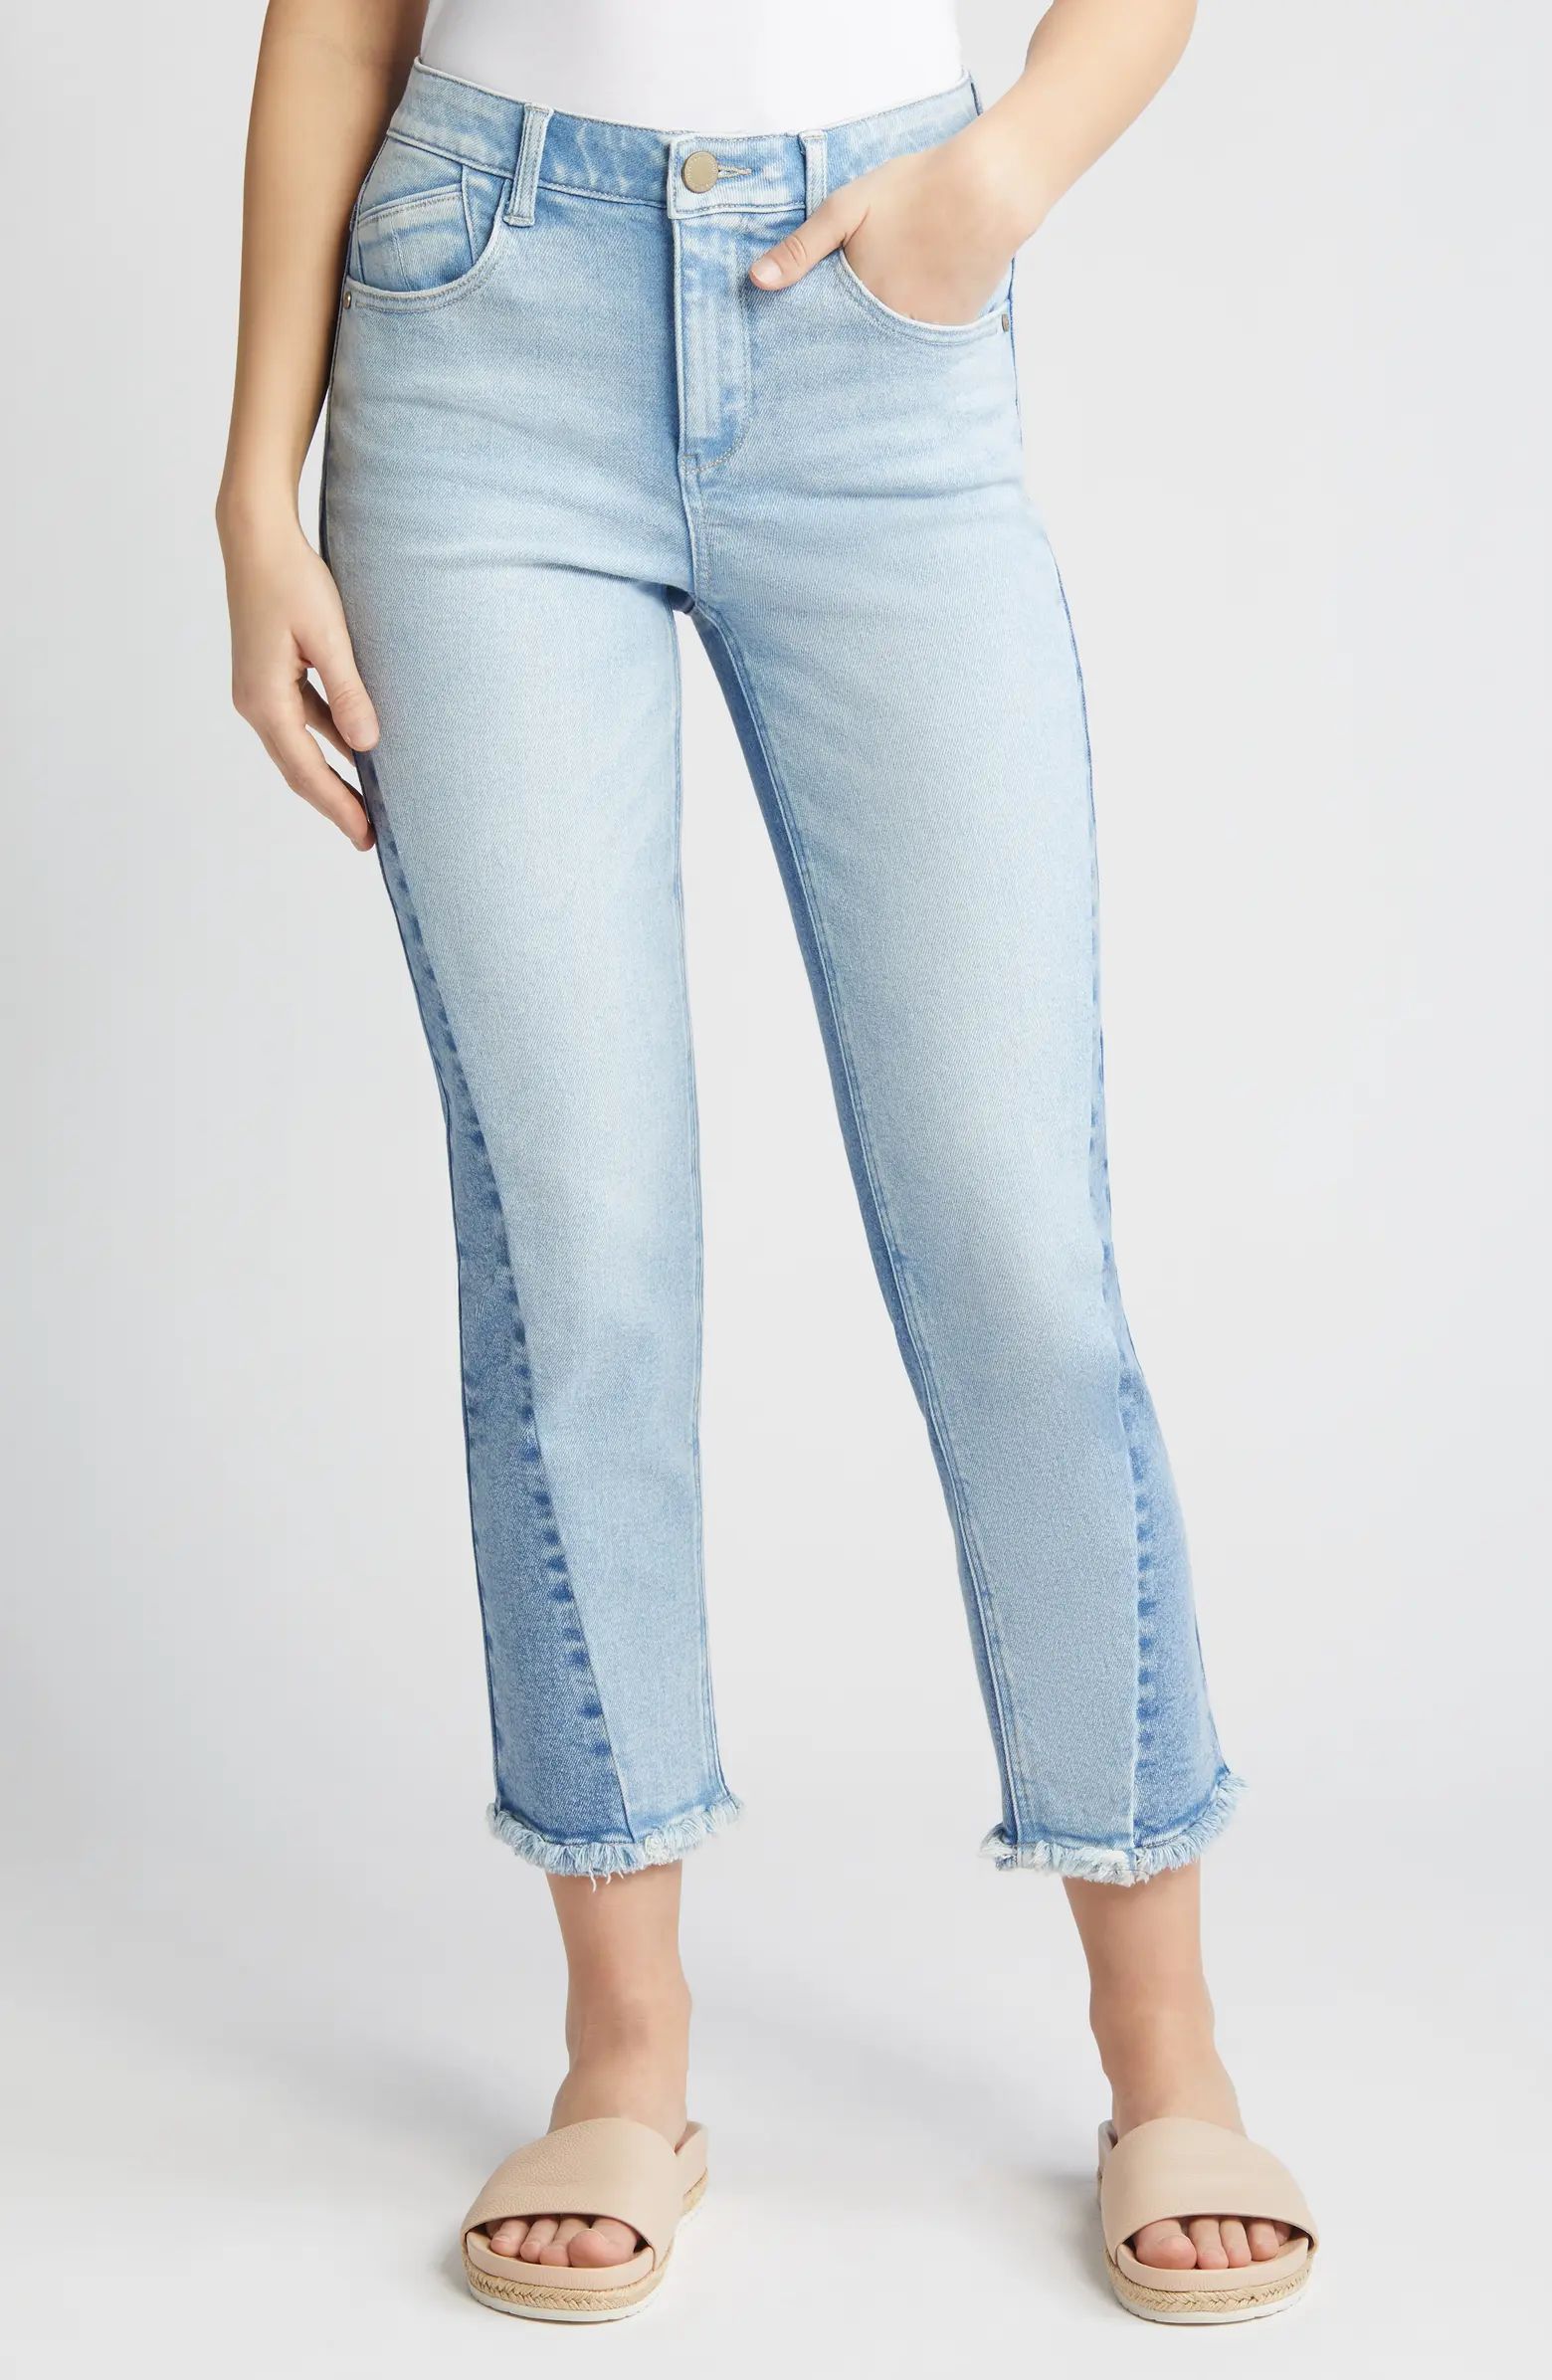 Wit & Wisdom 'Ab'Solution Pieced High Waist Ankle Straight Leg Jeans | Nordstrom | Nordstrom